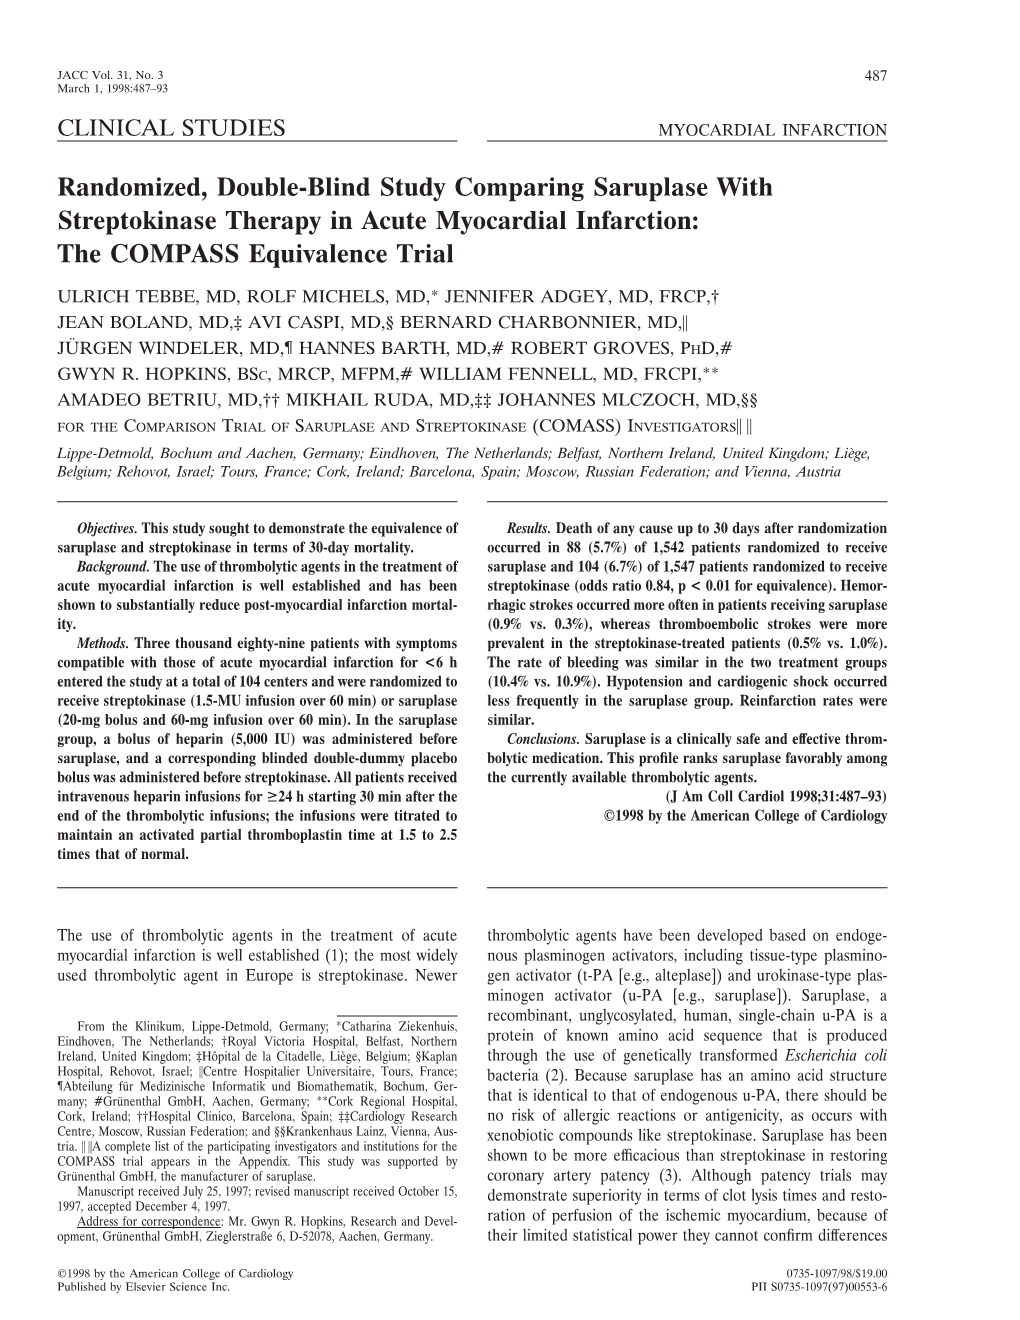 Randomized, Double-Blind Study Comparing Saruplase with Streptokinase Therapy in Acute Myocardial Infarction: the COMPASS Equivalence Trial